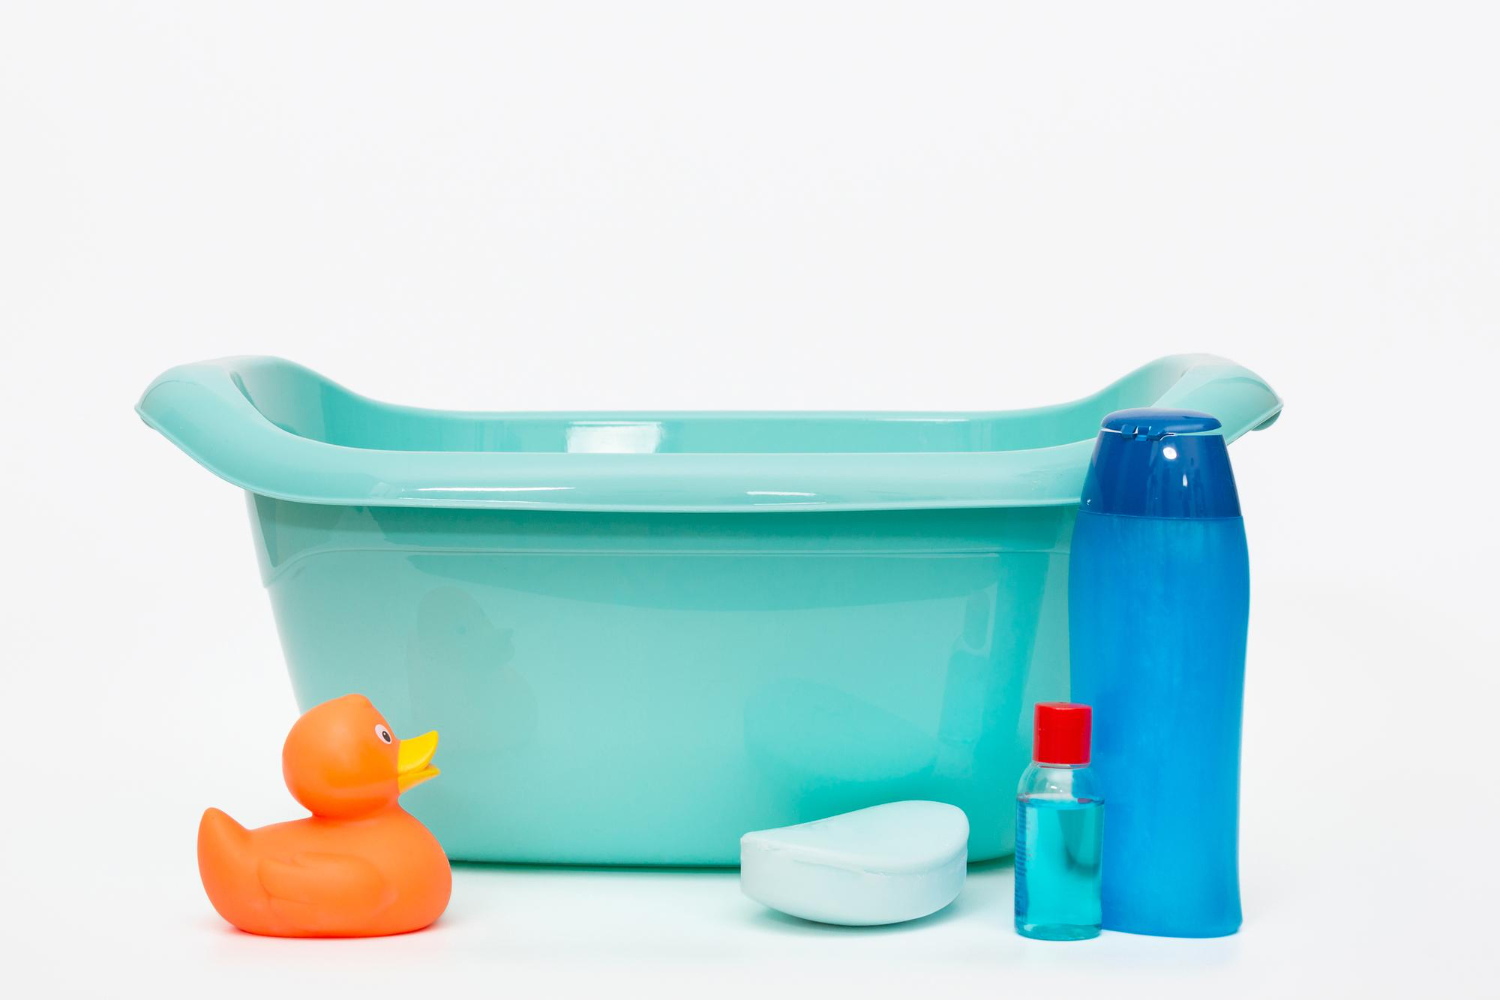 How to Clean Baby Bath Toys: 5 Easy Methods